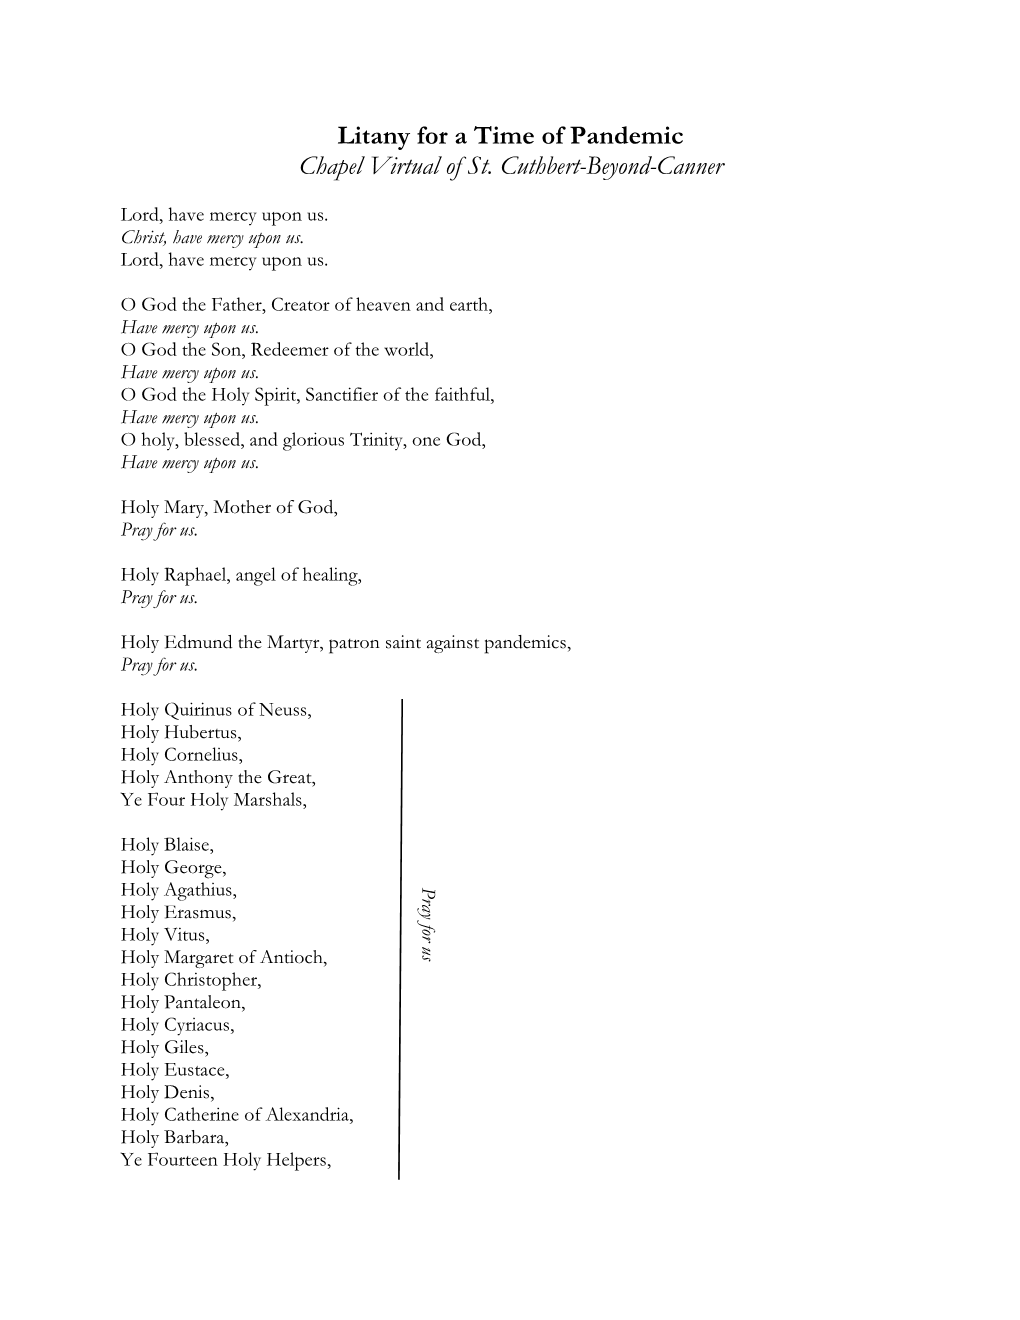 Litany for a Time of Pandemic Chapel Virtual of St. Cuthbert-Beyond-Canner